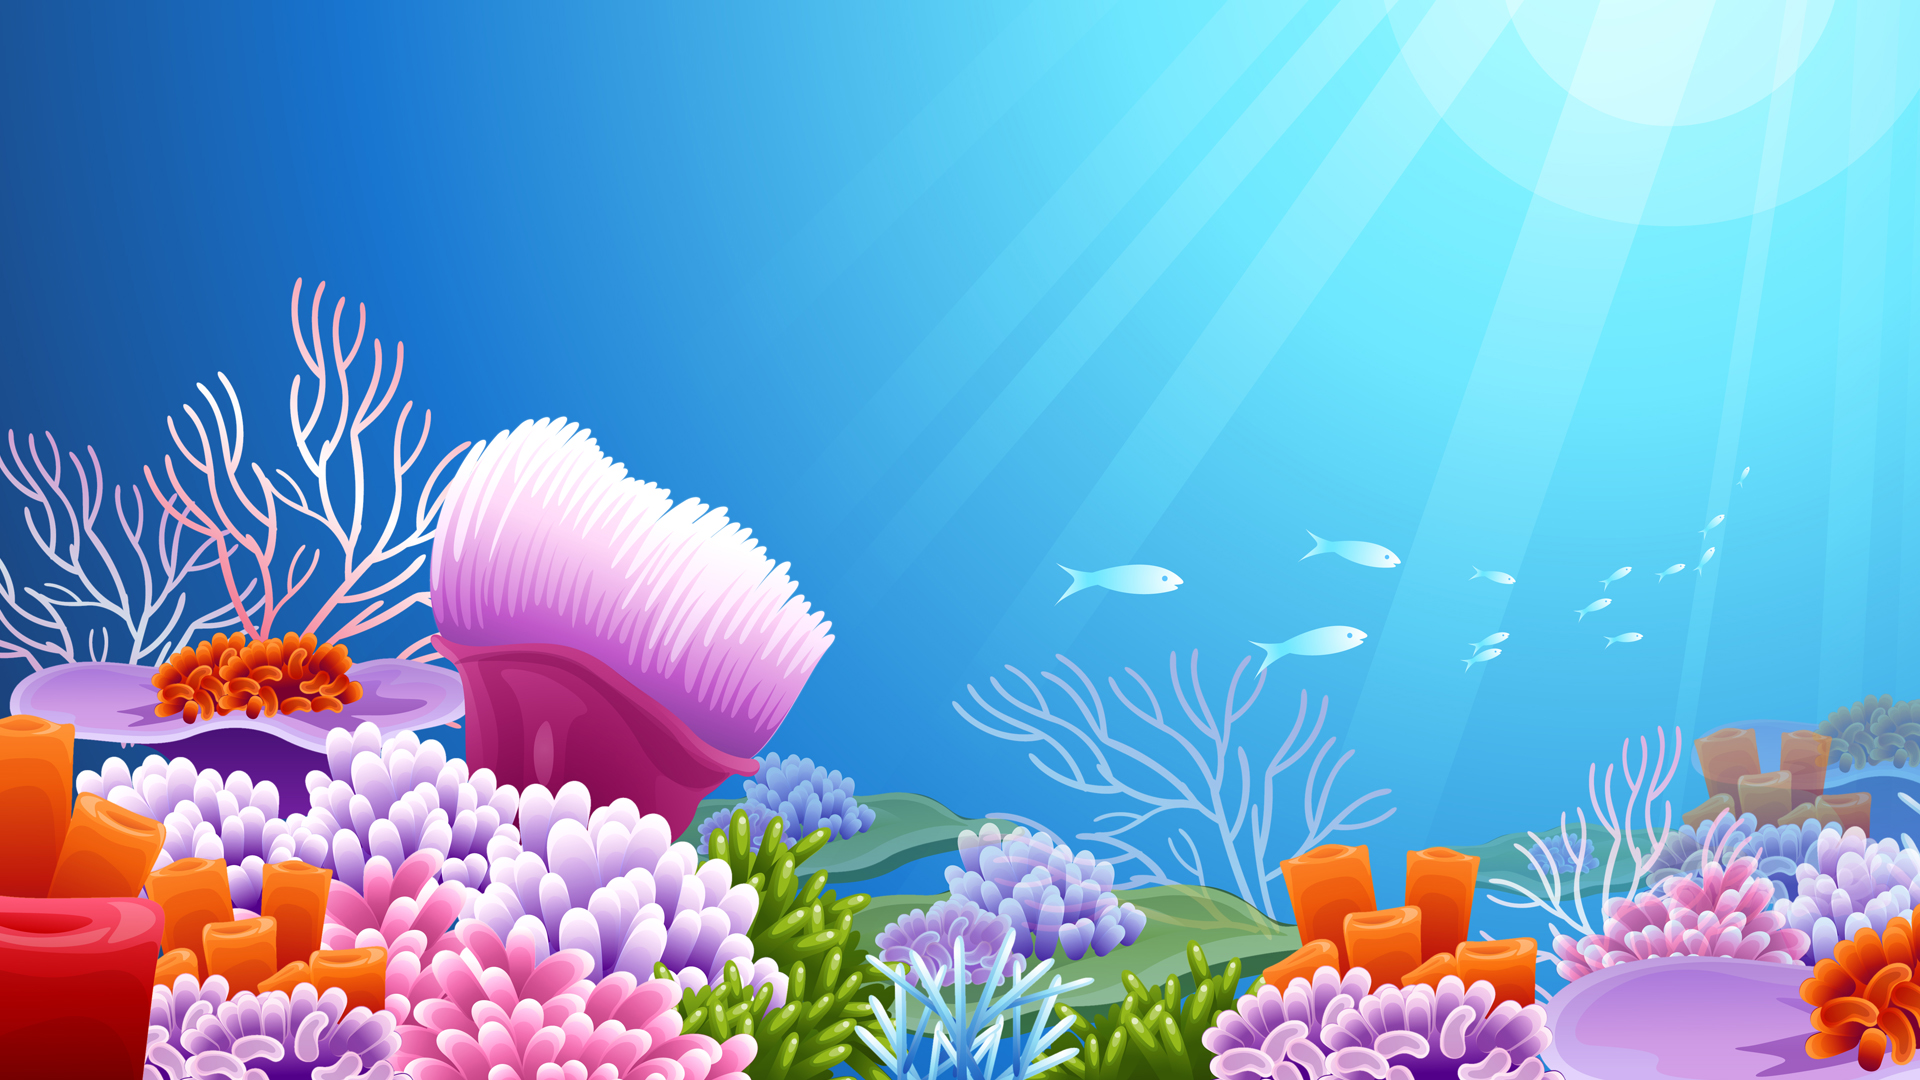 The best free Aquarium vector images Download from 66 free vectors of